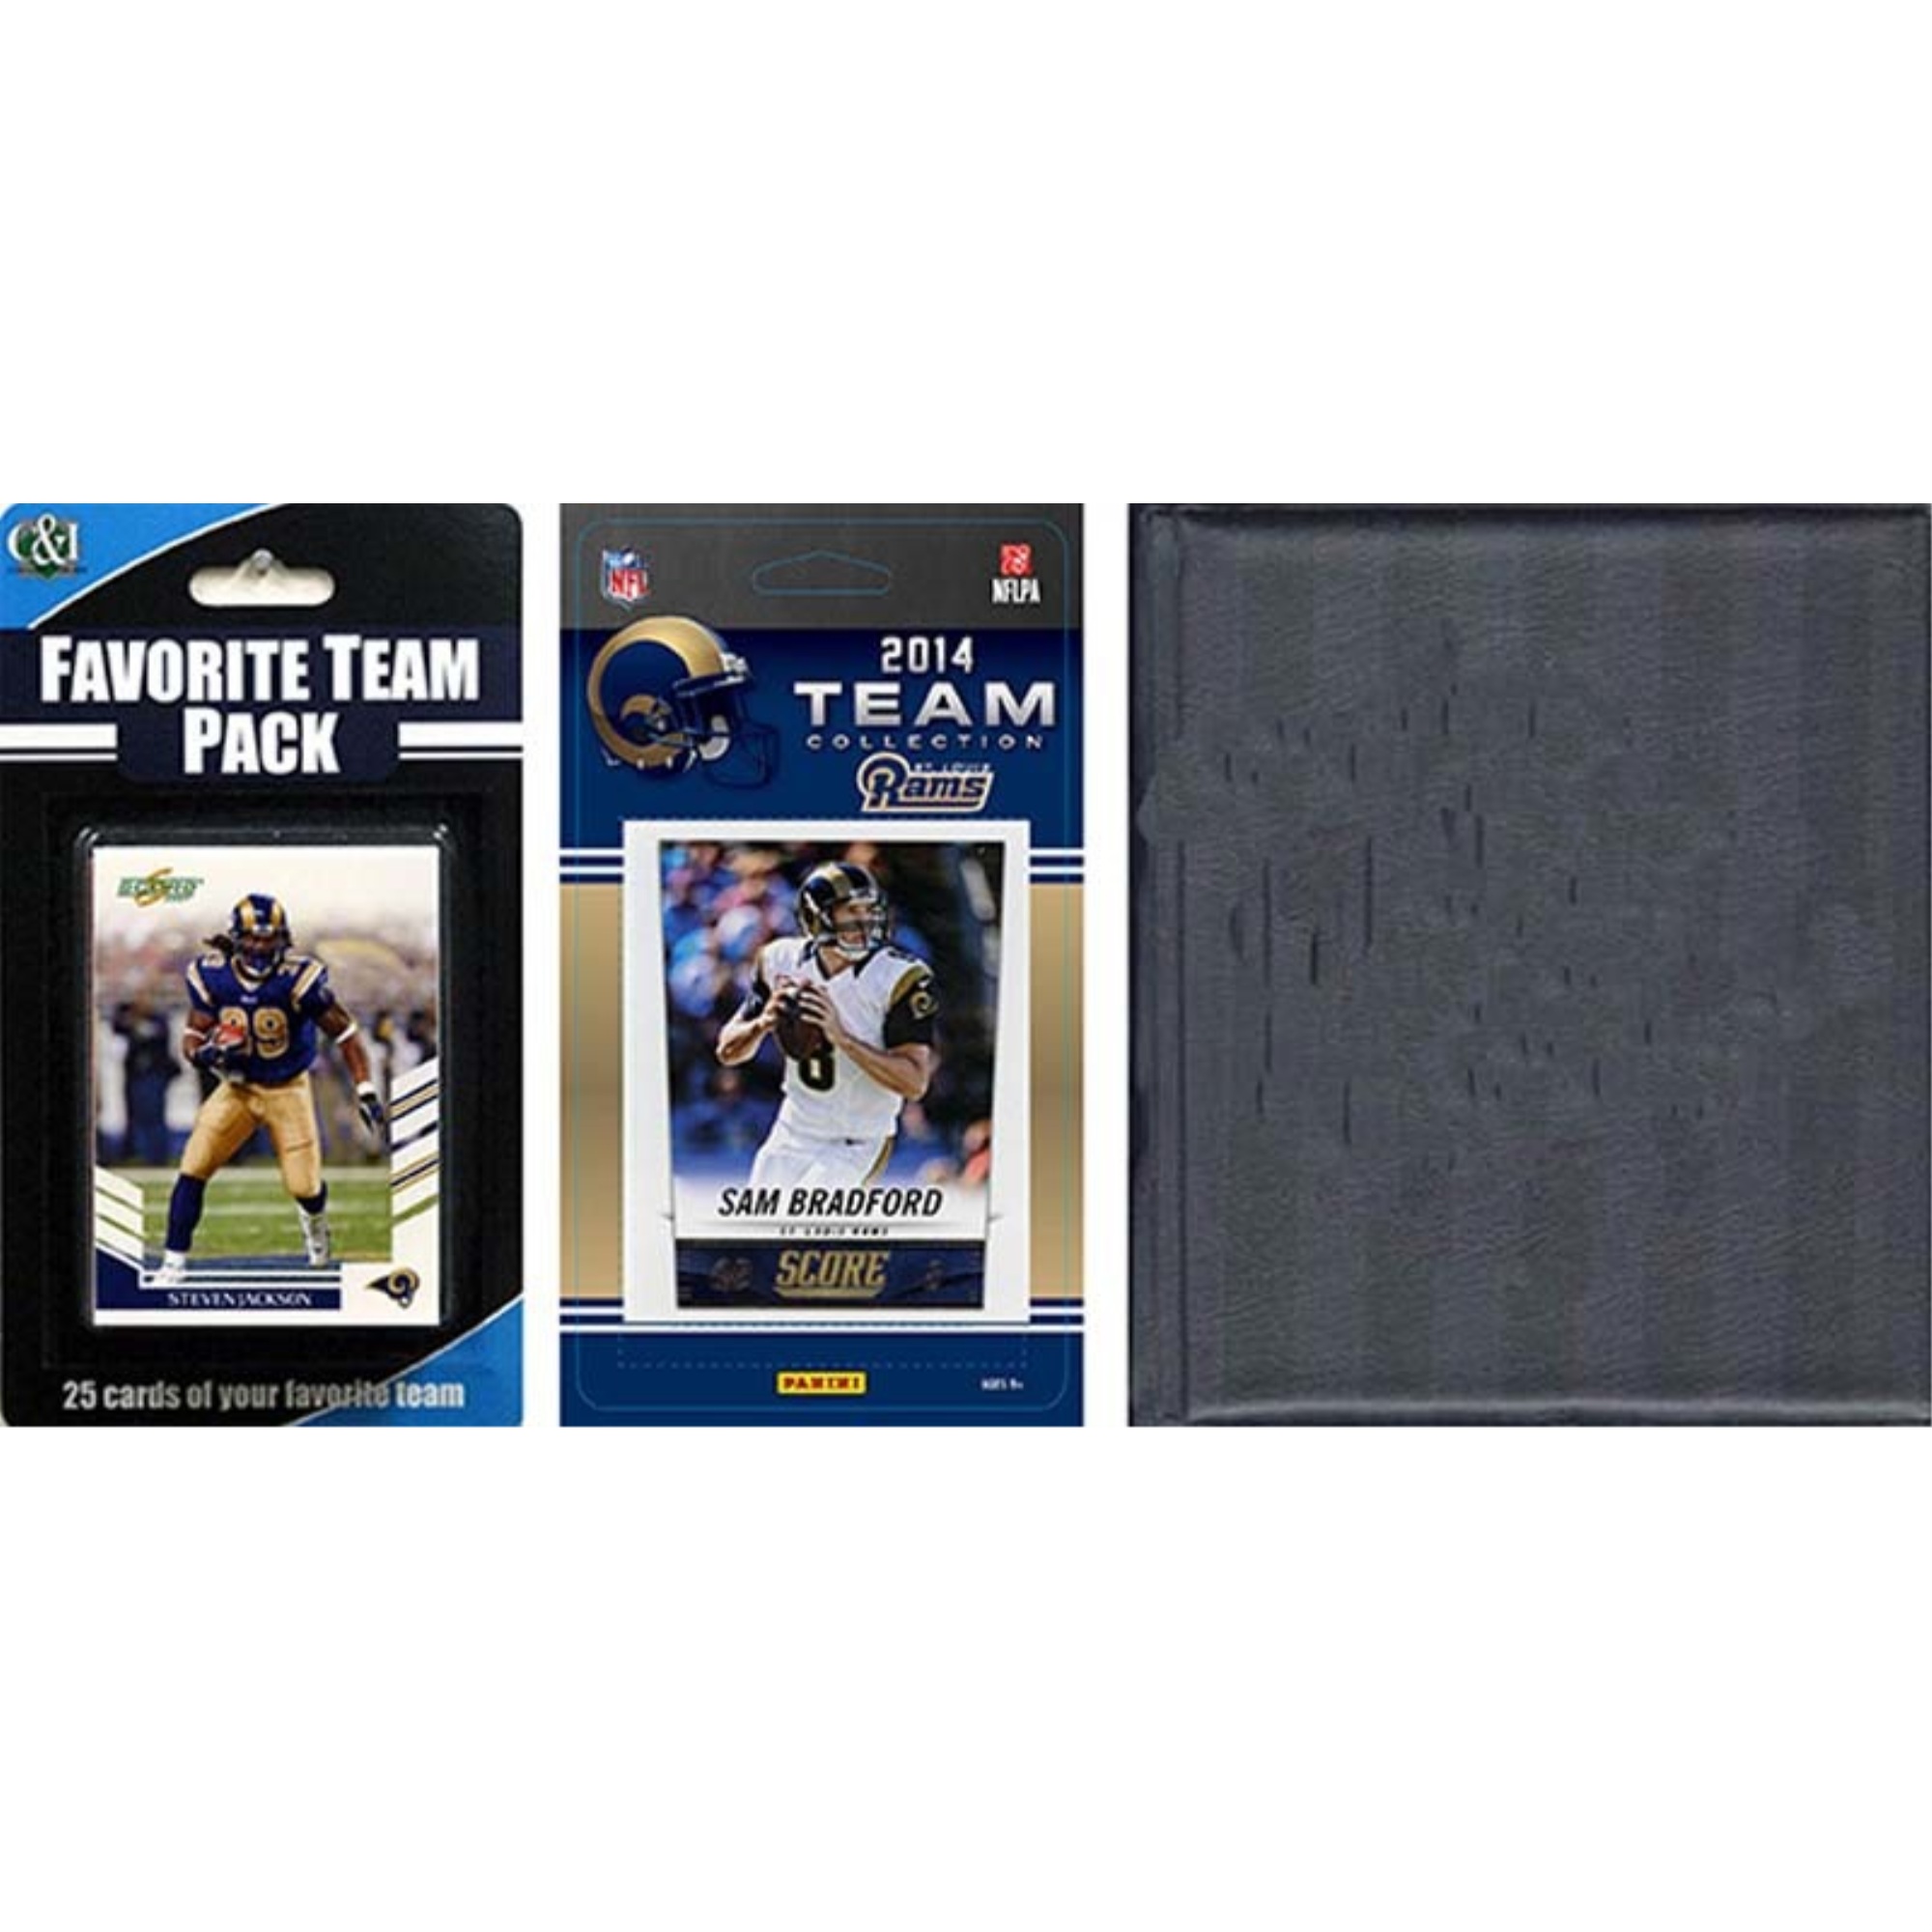 C & I Collectables NFL St. Louis Rams Licensed 2014 Score Team Set and Favorite Player Trading Card Pack Plus Storage Album